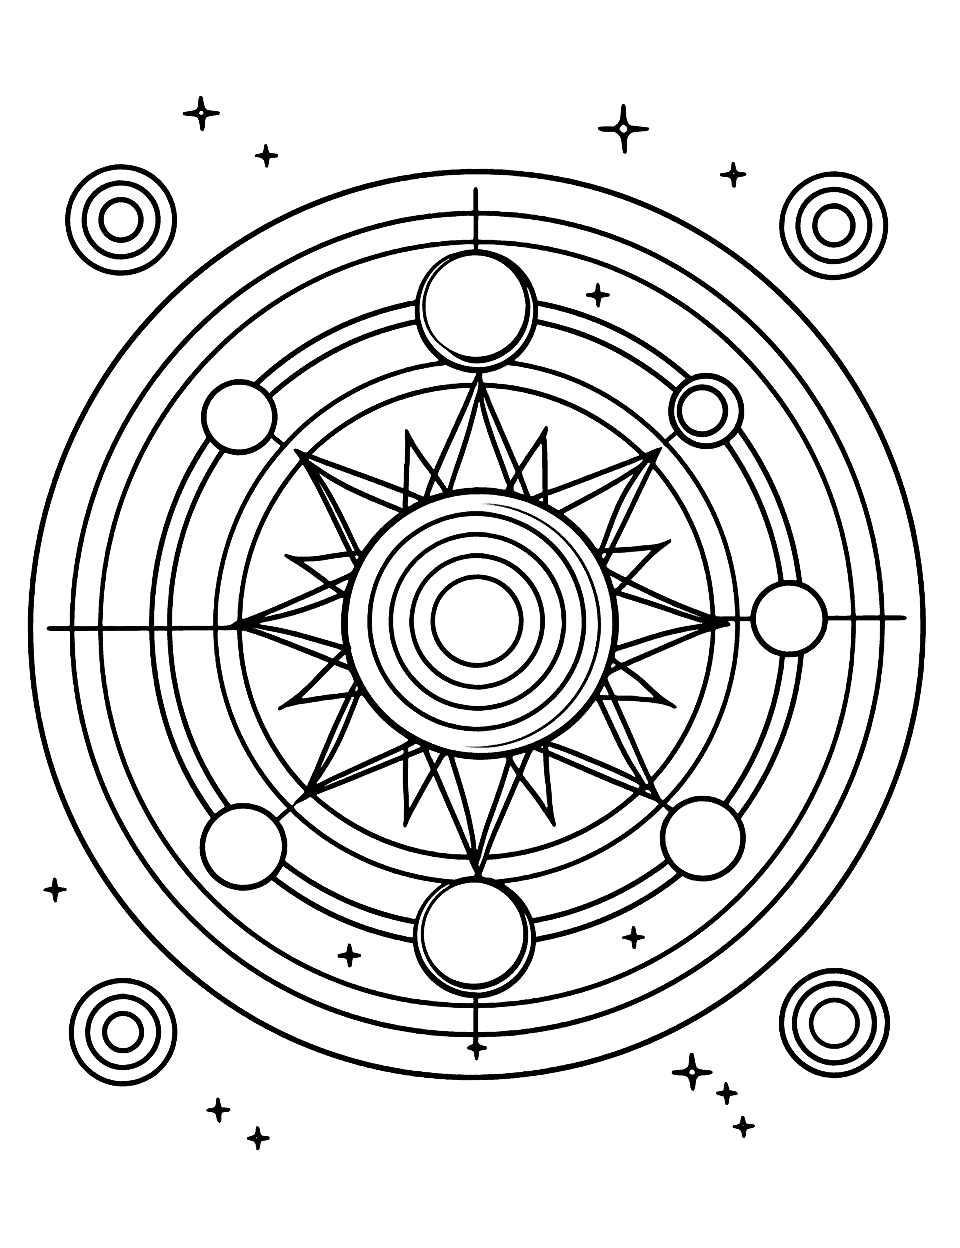 Solar System Mandala Coloring Page - A cool and educational mandala featuring planets, stars, and comets, great for kids interested in space.